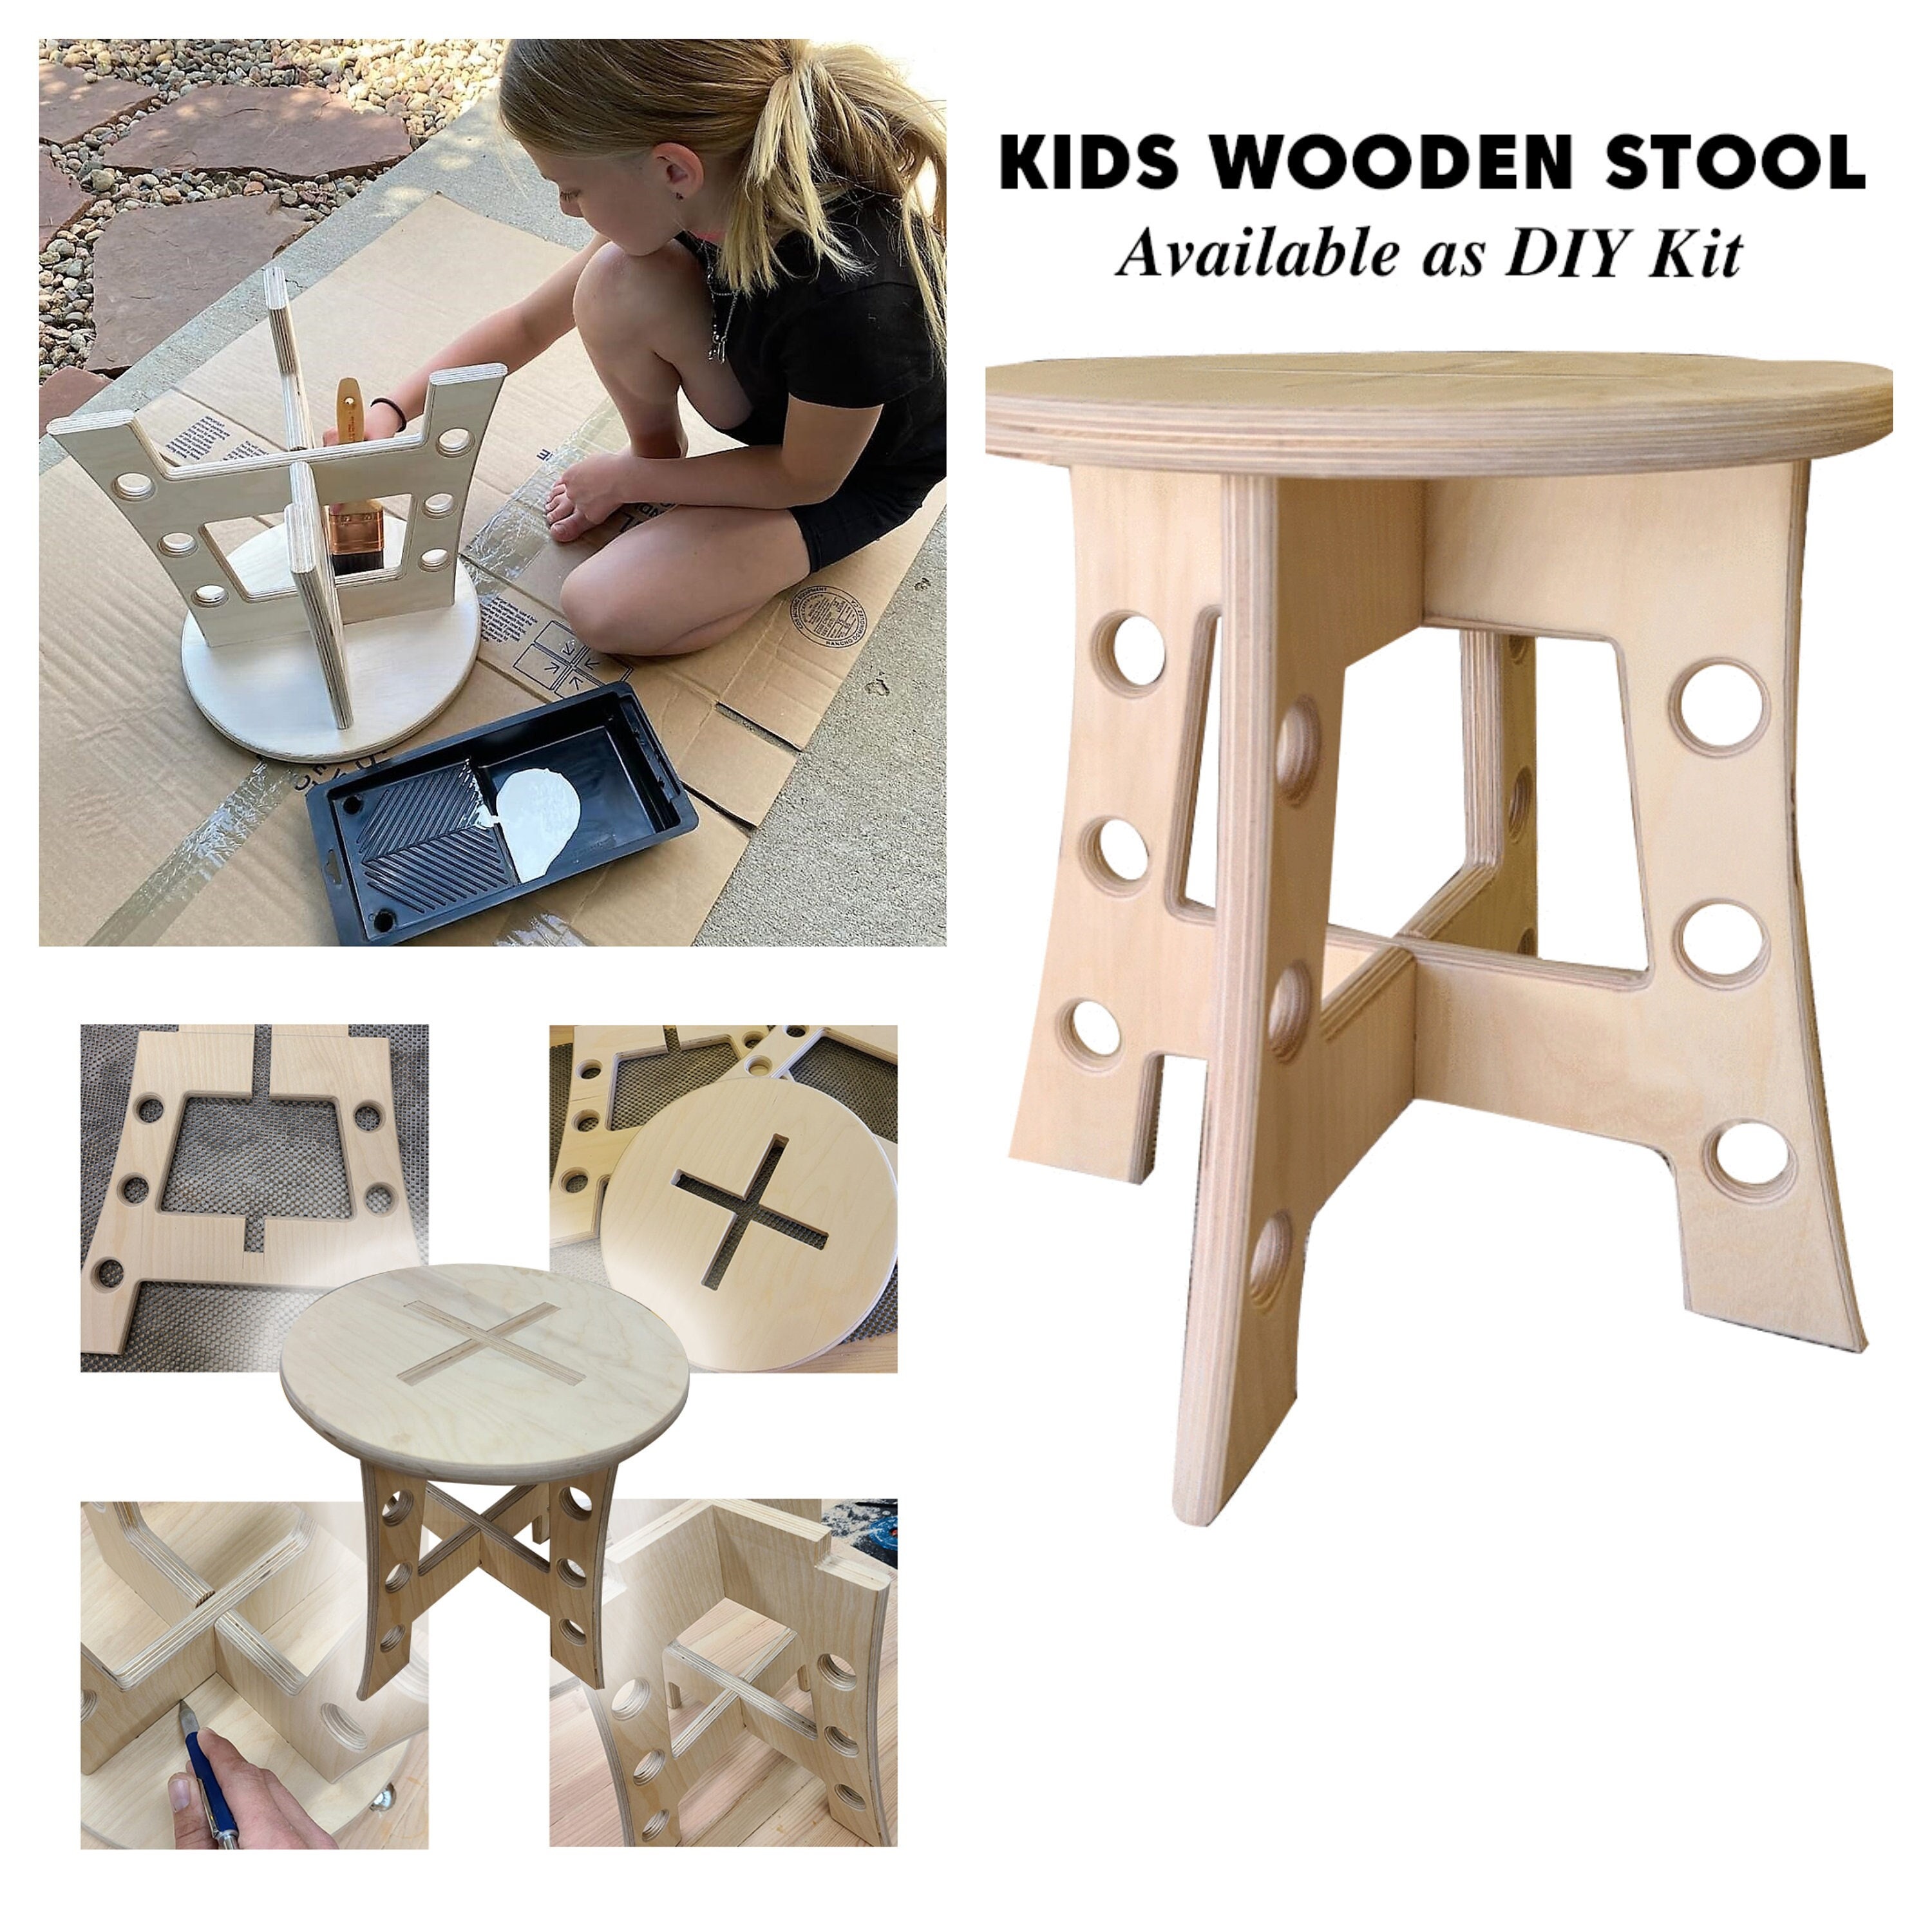 Building Woodworking kit for Kids and Adults - Building Kits - Wood  Projects, Wood Building Kits for Kids Ages 8-12 - Wood Projects - Building